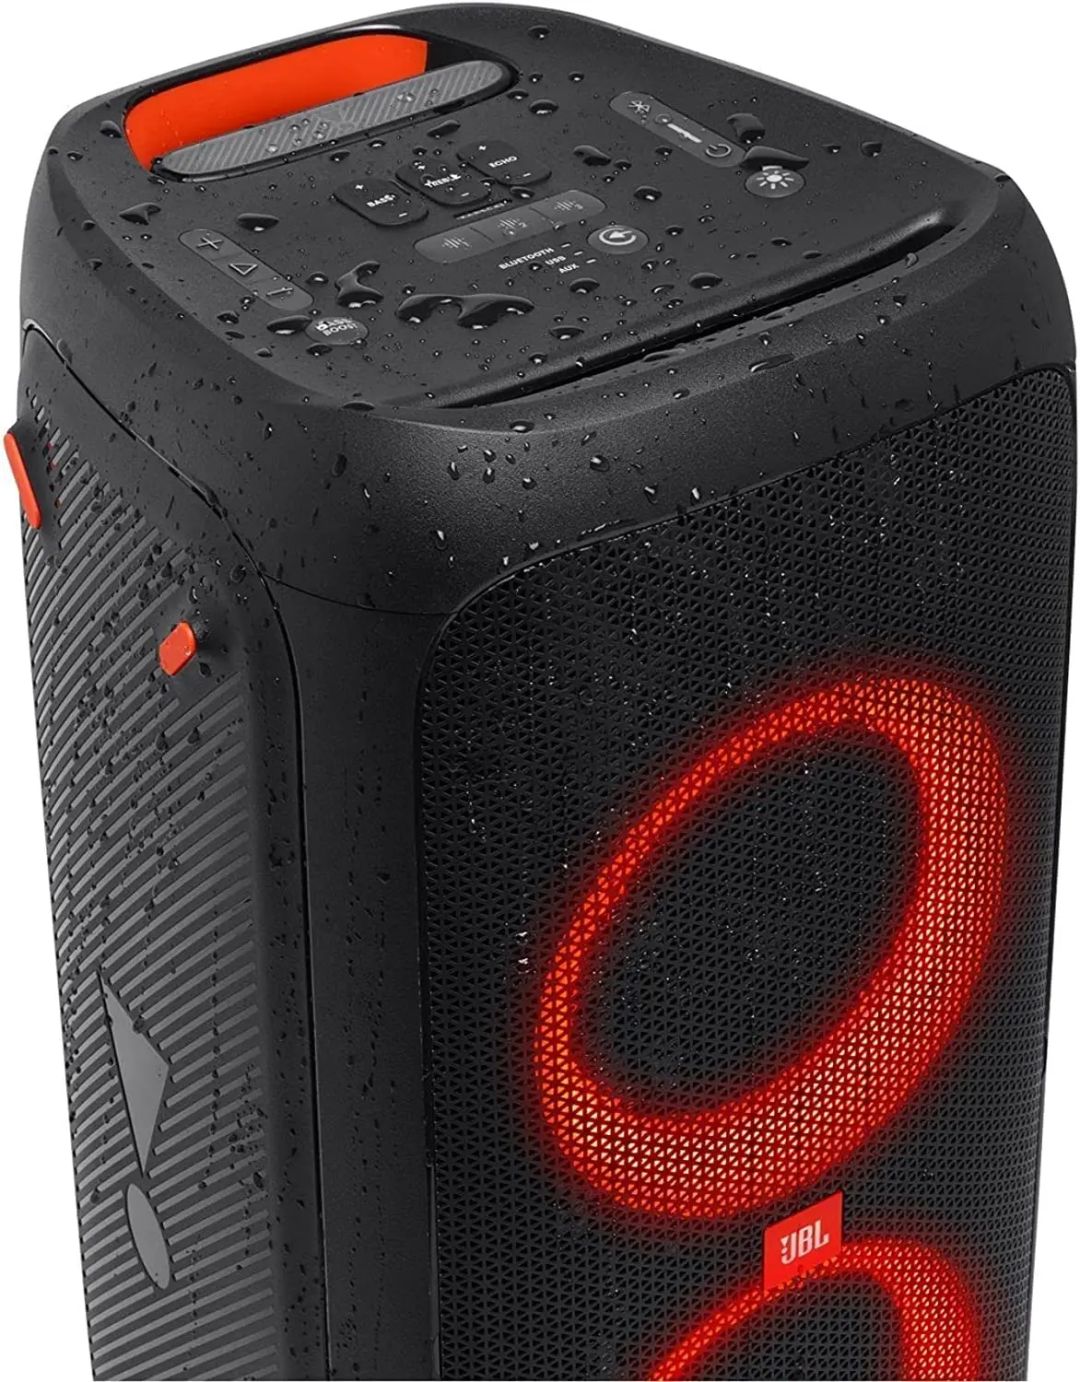 JBL Partybox 310 - Portable Party Speaker with Long Lasting Battery, Powerful JBL Sound and Exciting